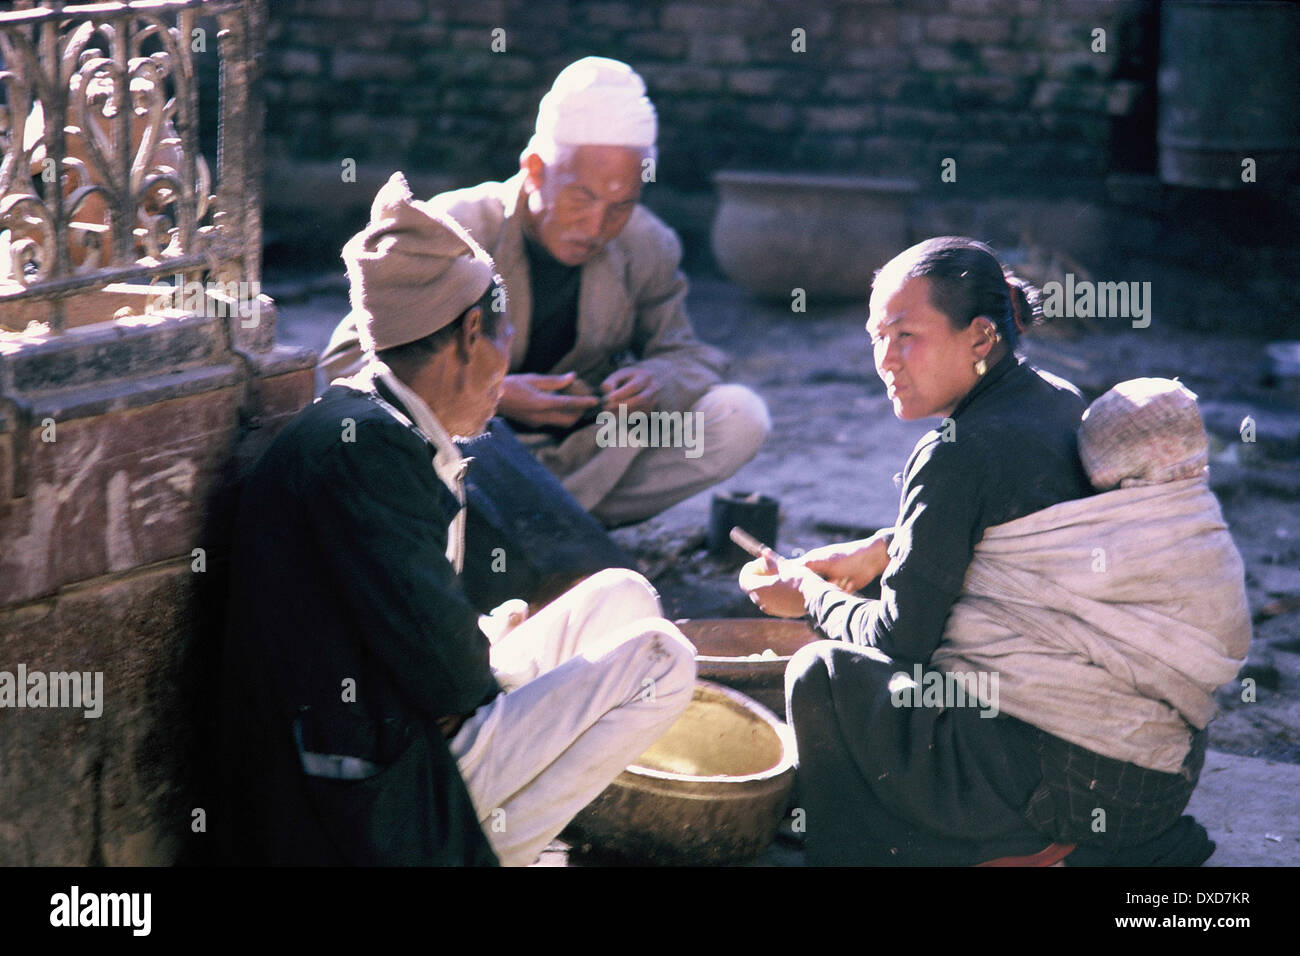 Woman with baby and two men, Nepal, 1969 Stock Photo